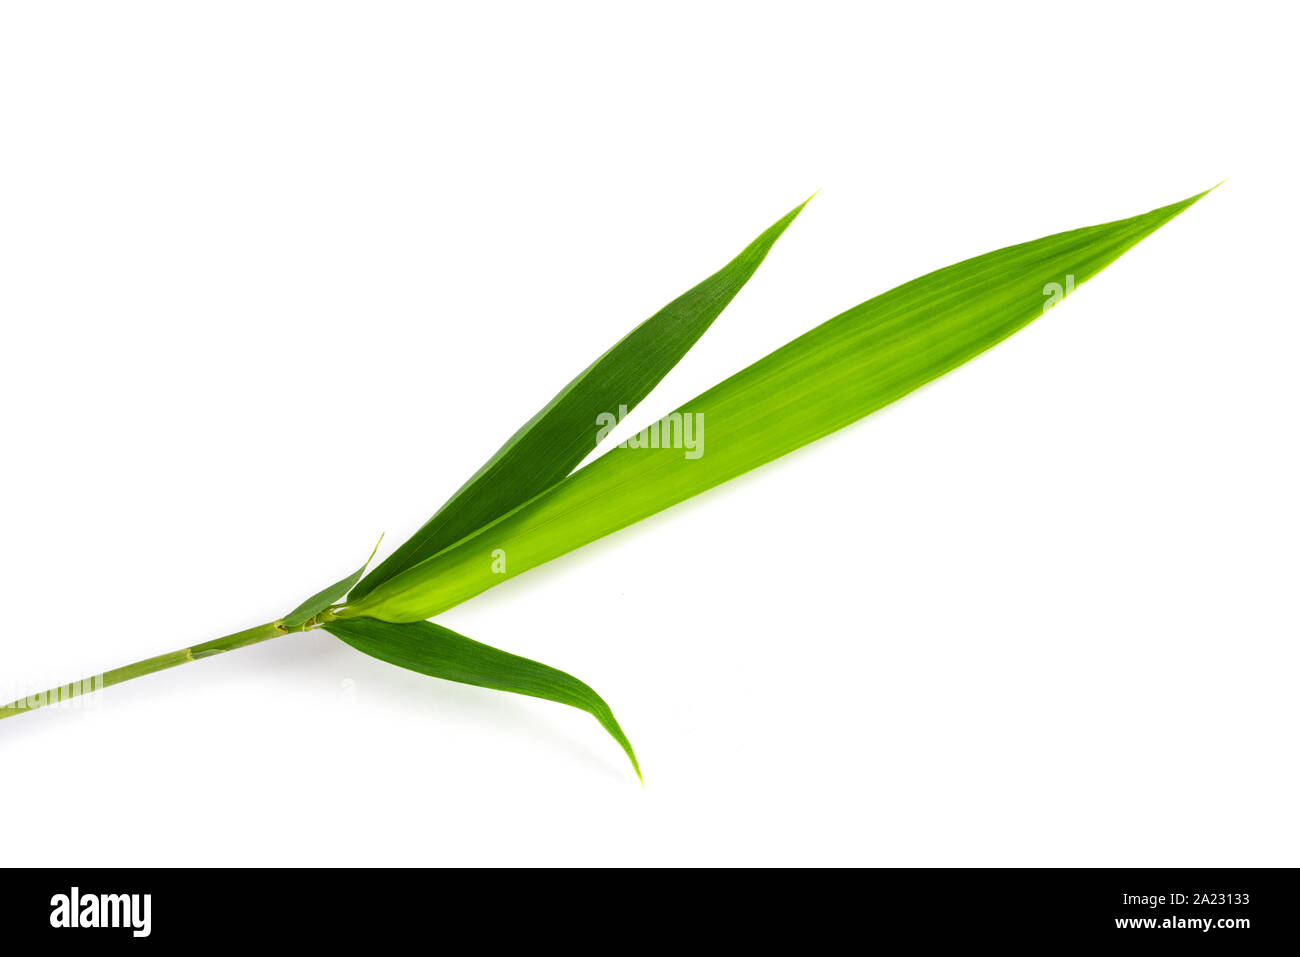 Bamboo branch isolated on white background Stock Photo